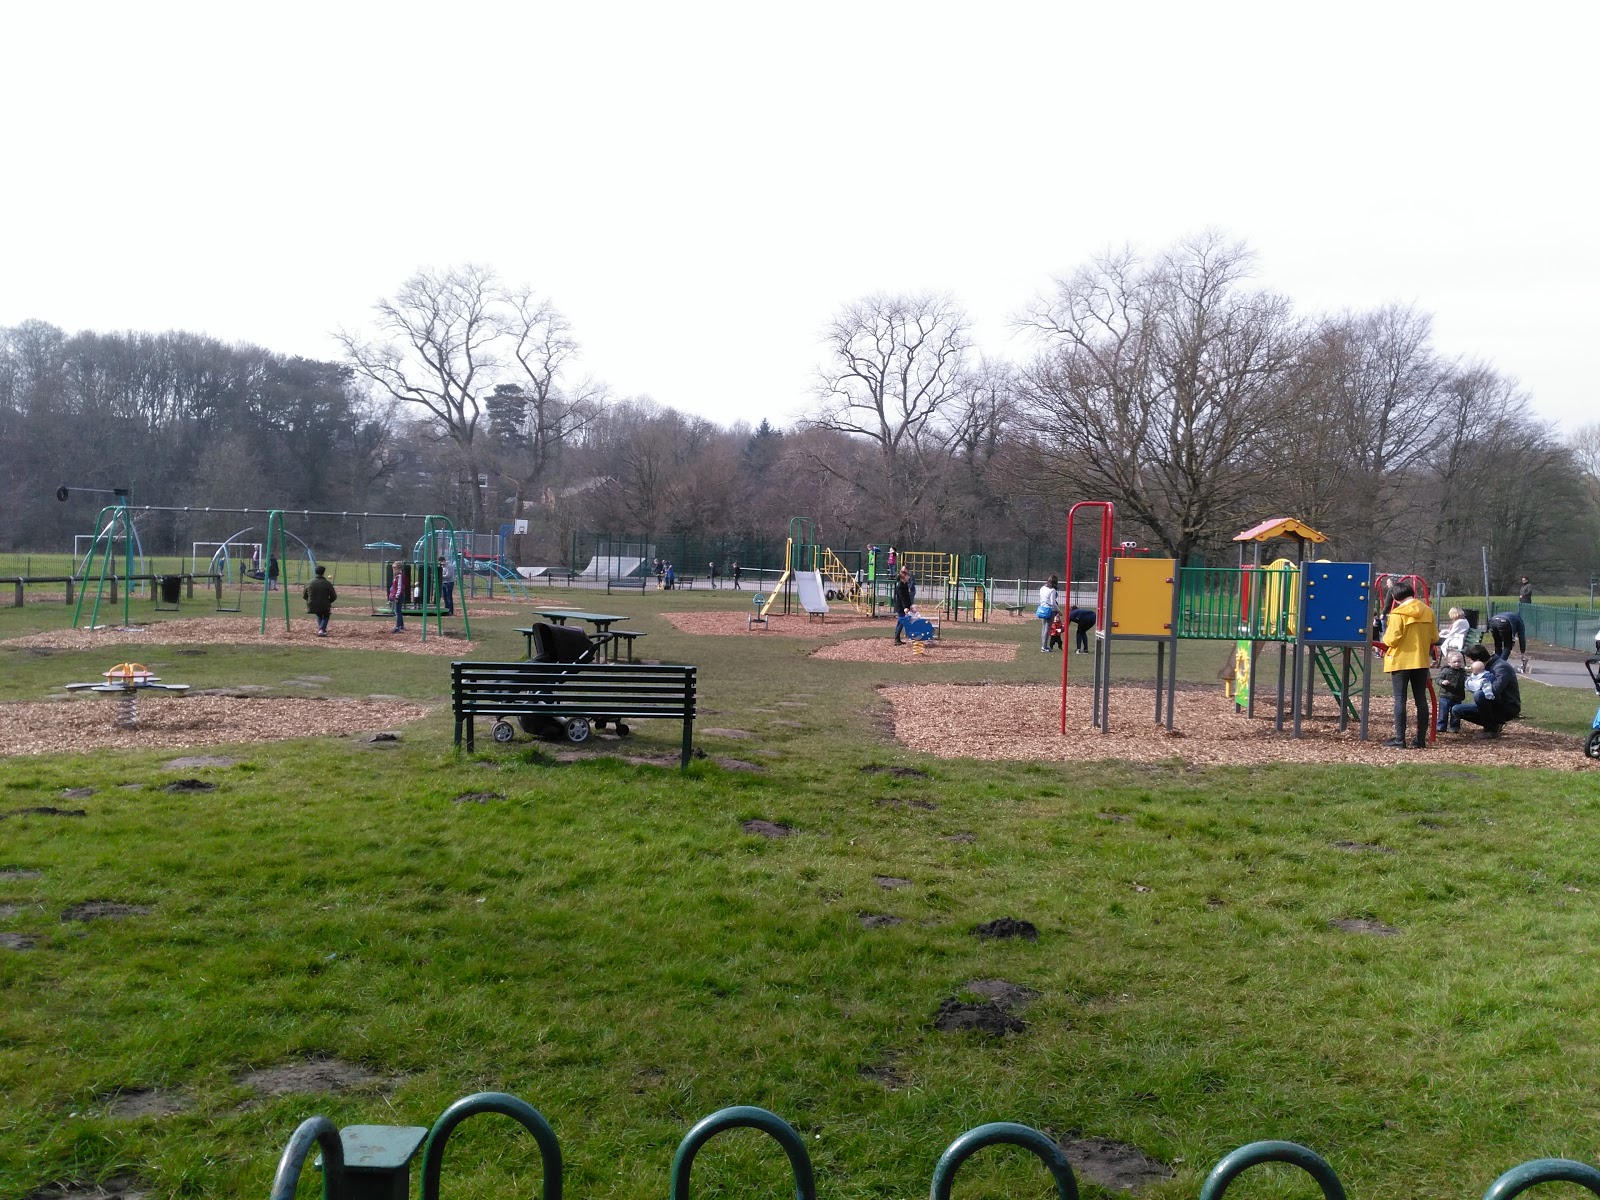 https://whatremovals.co.uk/wp-content/uploads/2022/02/The Carrs Park-300x225.jpeg